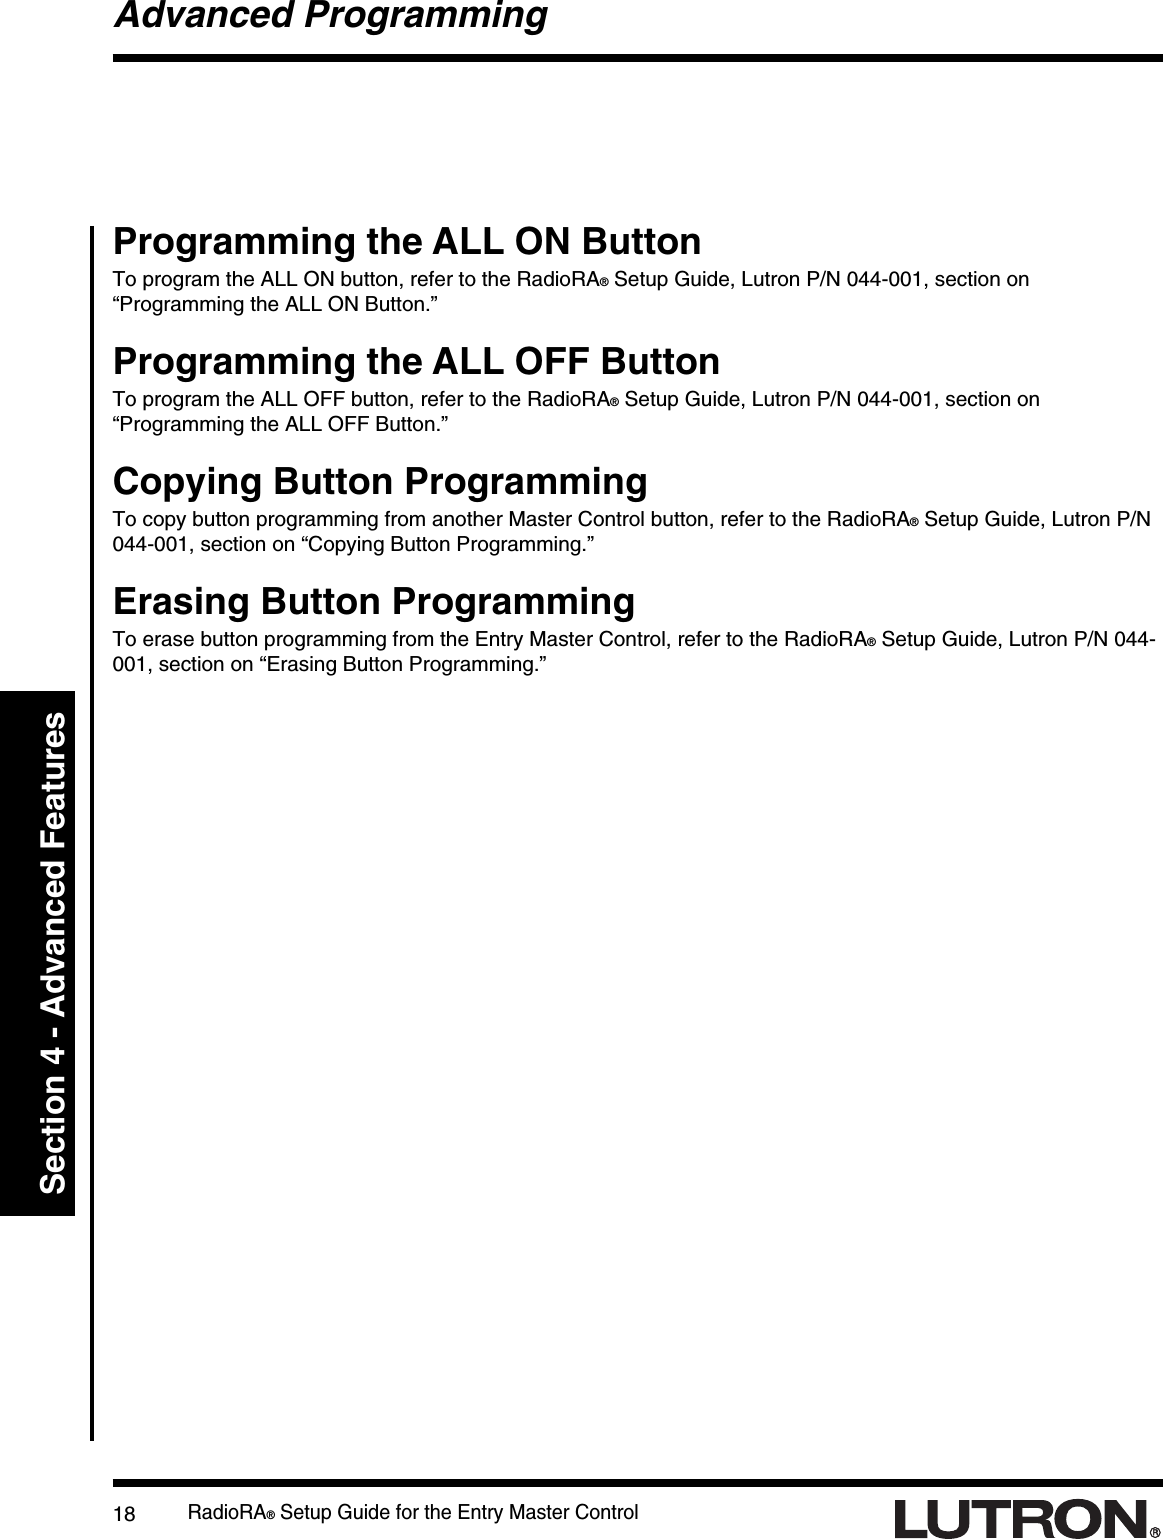 RadioRA® Setup Guide for the Entry Master Control18Section 4 - Advanced FeaturesAdvanced ProgrammingProgramming the ALL ON ButtonTo program the ALL ON button, refer to the RadioRA® Setup Guide, Lutron P/N 044-001, section on“Programming the ALL ON Button.”Programming the ALL OFF ButtonTo program the ALL OFF button, refer to the RadioRA® Setup Guide, Lutron P/N 044-001, section on“Programming the ALL OFF Button.”Copying Button ProgrammingTo copy button programming from another Master Control button, refer to the RadioRA® Setup Guide, Lutron P/N044-001, section on “Copying Button Programming.”Erasing Button ProgrammingTo erase button programming from the Entry Master Control, refer to the RadioRA® Setup Guide, Lutron P/N 044-001, section on “Erasing Button Programming.”